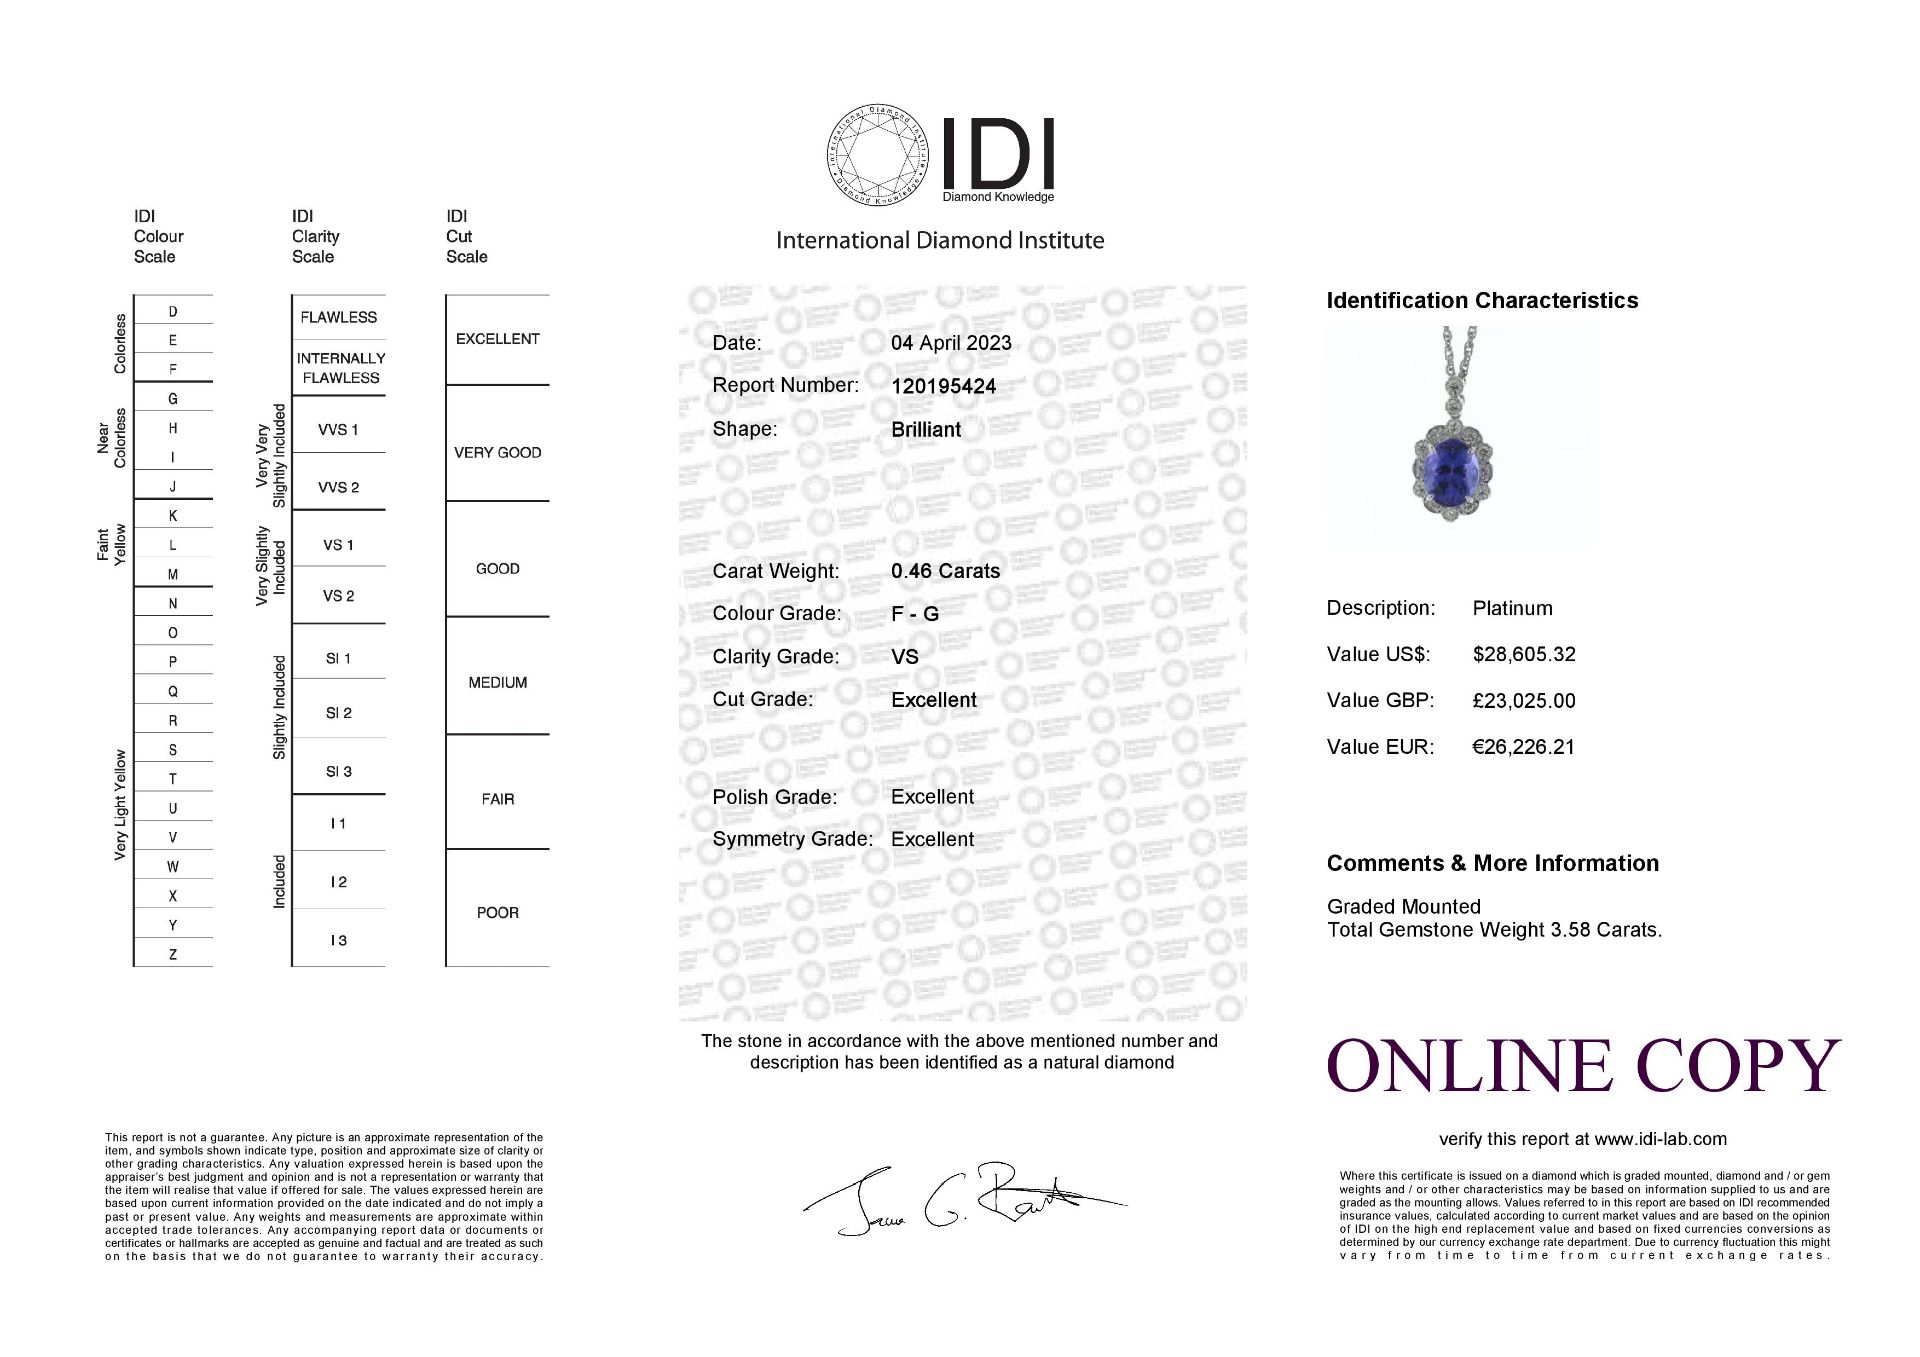 Platinum Oval Cluster Tanzanite And Diamond Pendant (T3.58) 0.46 Carats - Valued By IDI £23,025.00 - - Image 2 of 2